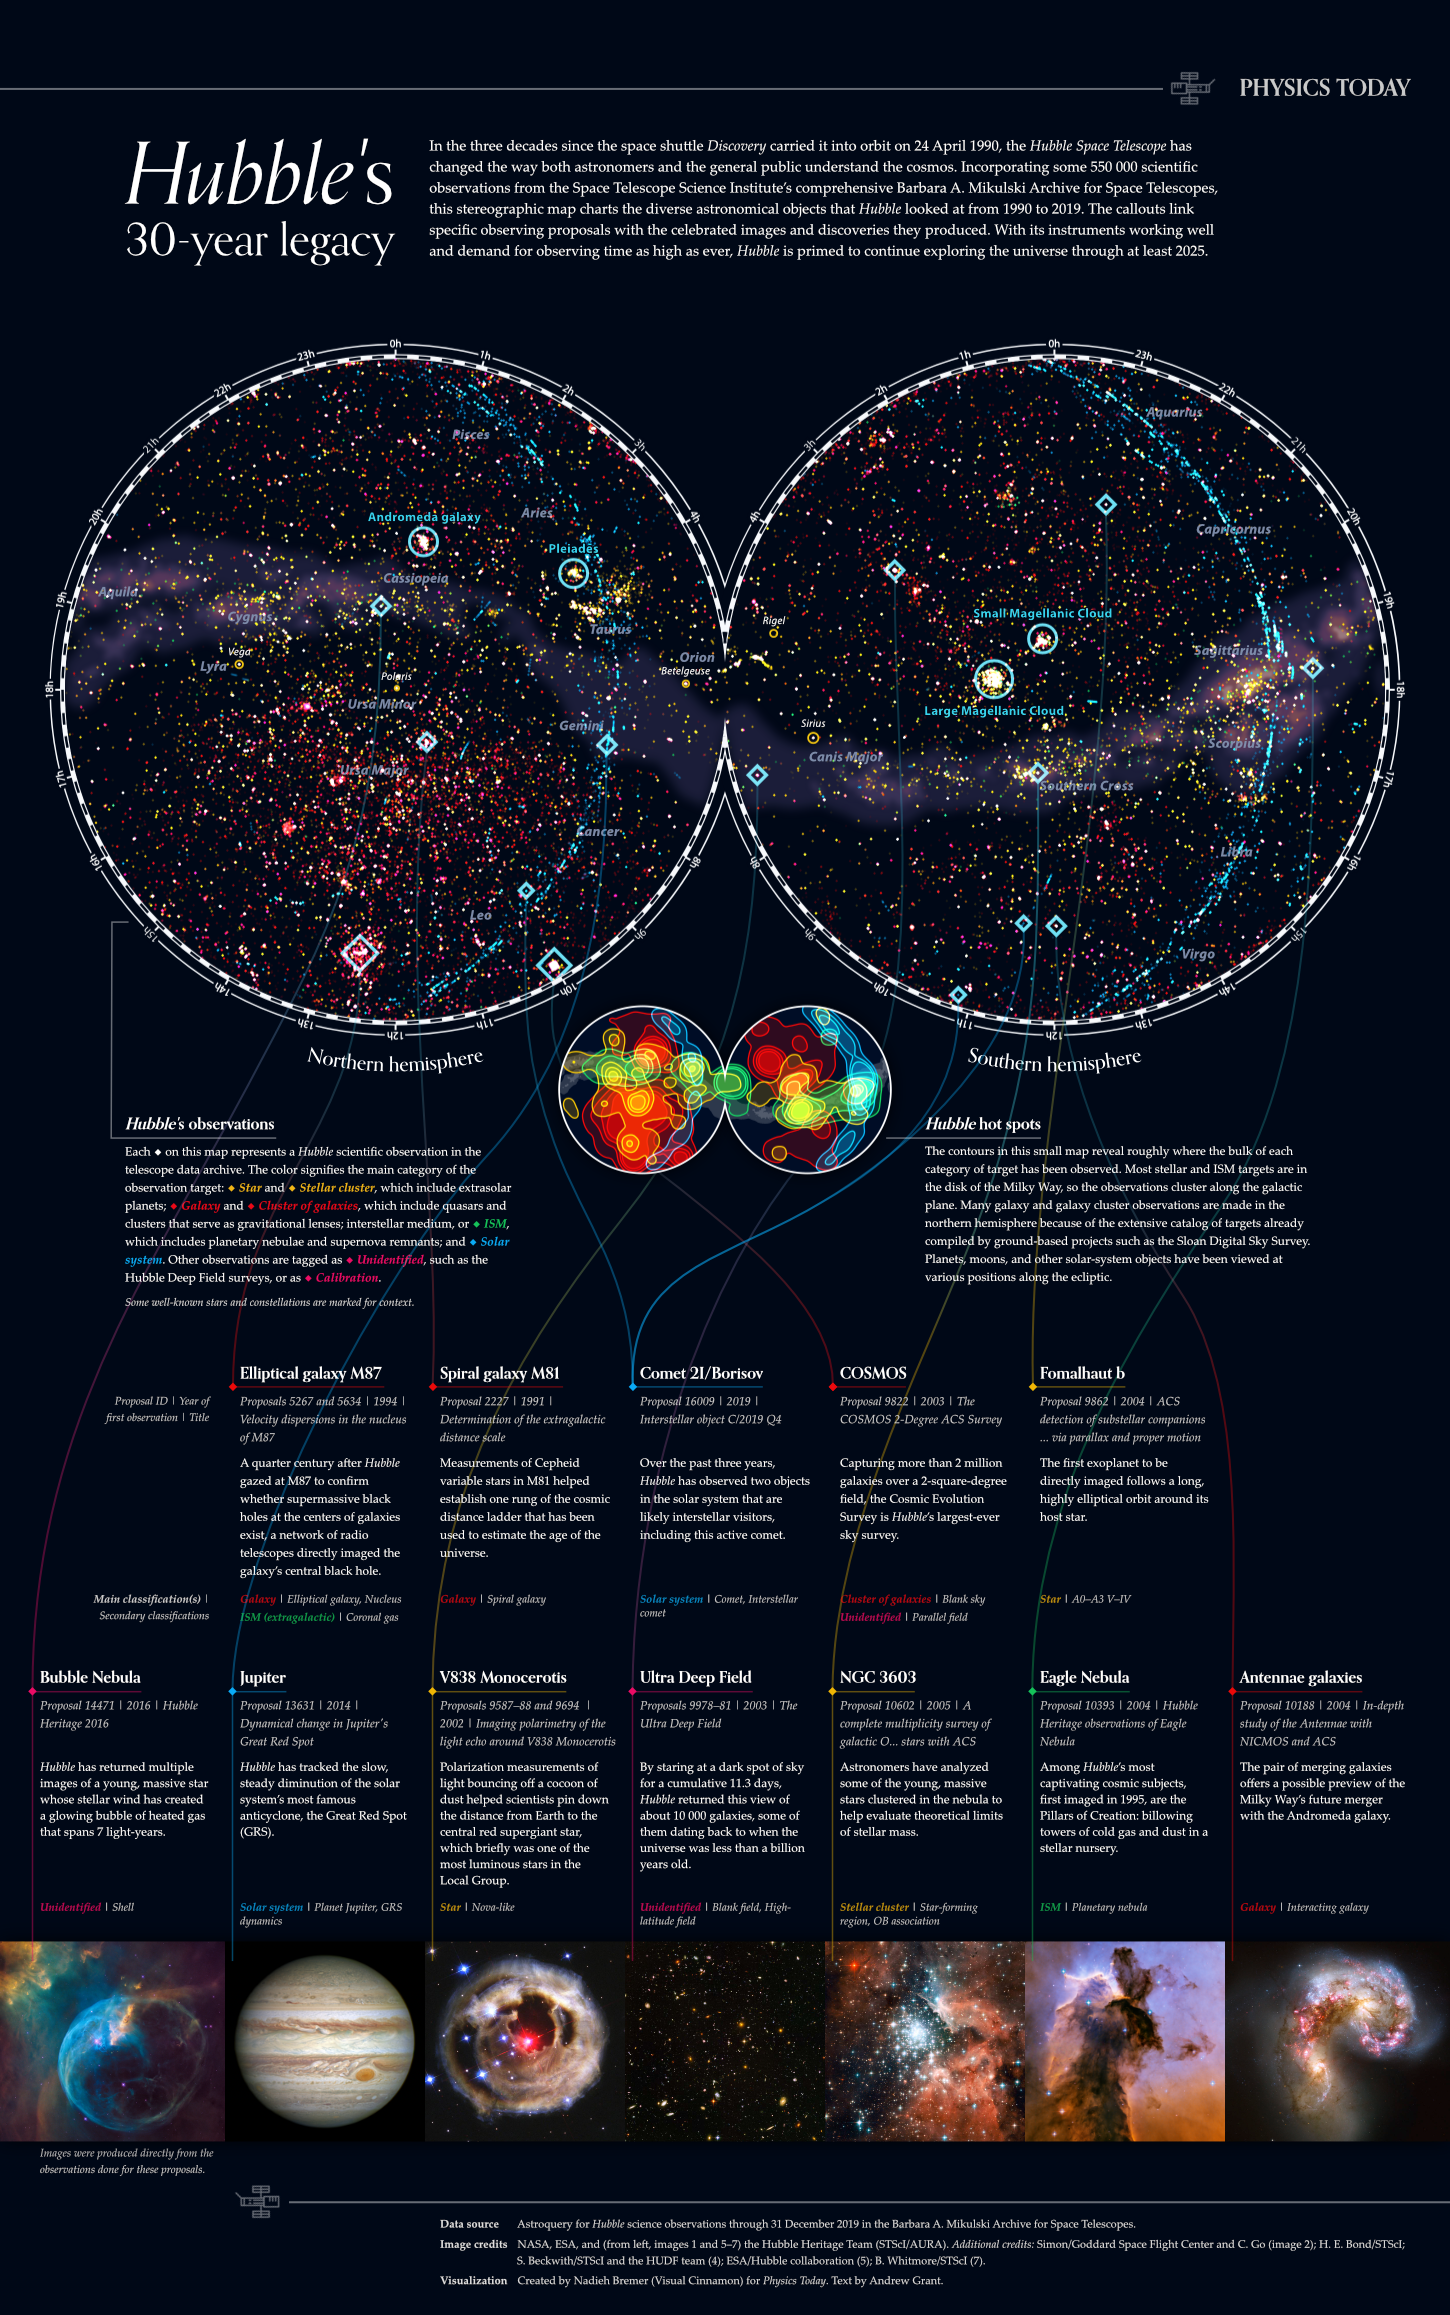 Infographic highlighting the Hubble Space Telescope's observations over 30 years